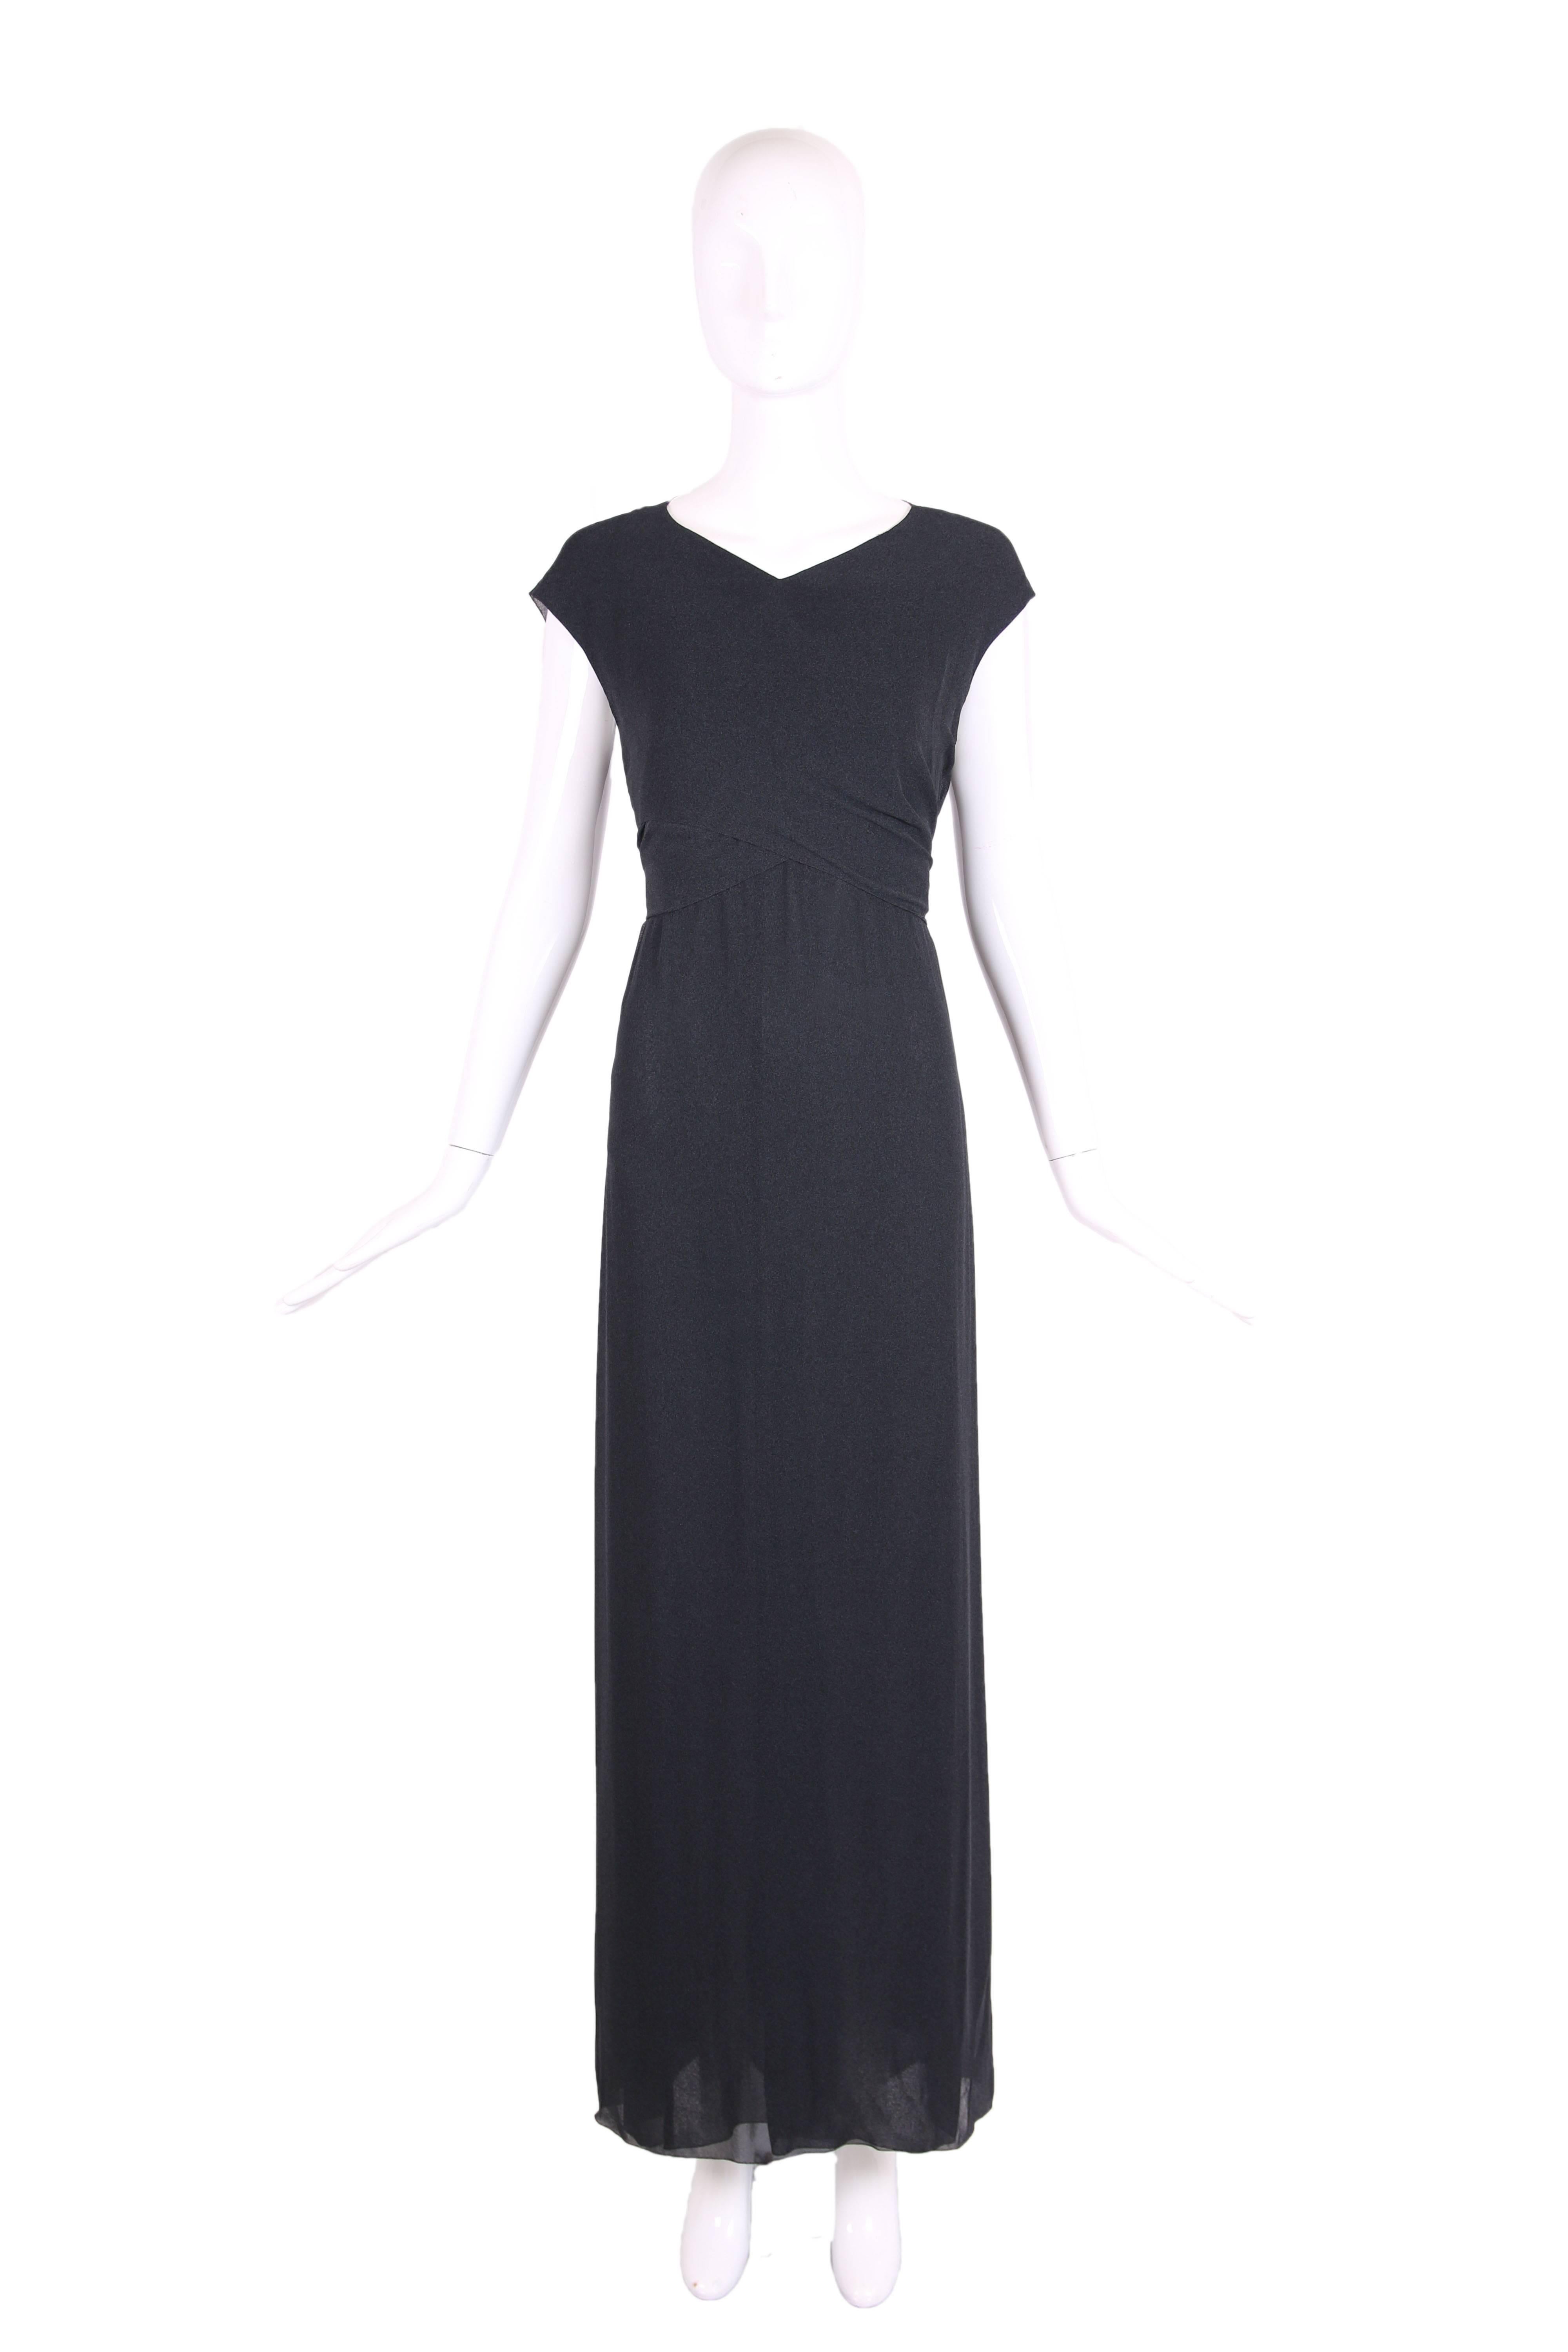 1998 Chanel slate gray crepe 2-pc comprised of a halter neck gown and overlay which criss-crosses at the front and can be worn tied at the back or front. In excellent condition. Size tag 40 - measurements are for halter neck gown underlay. 